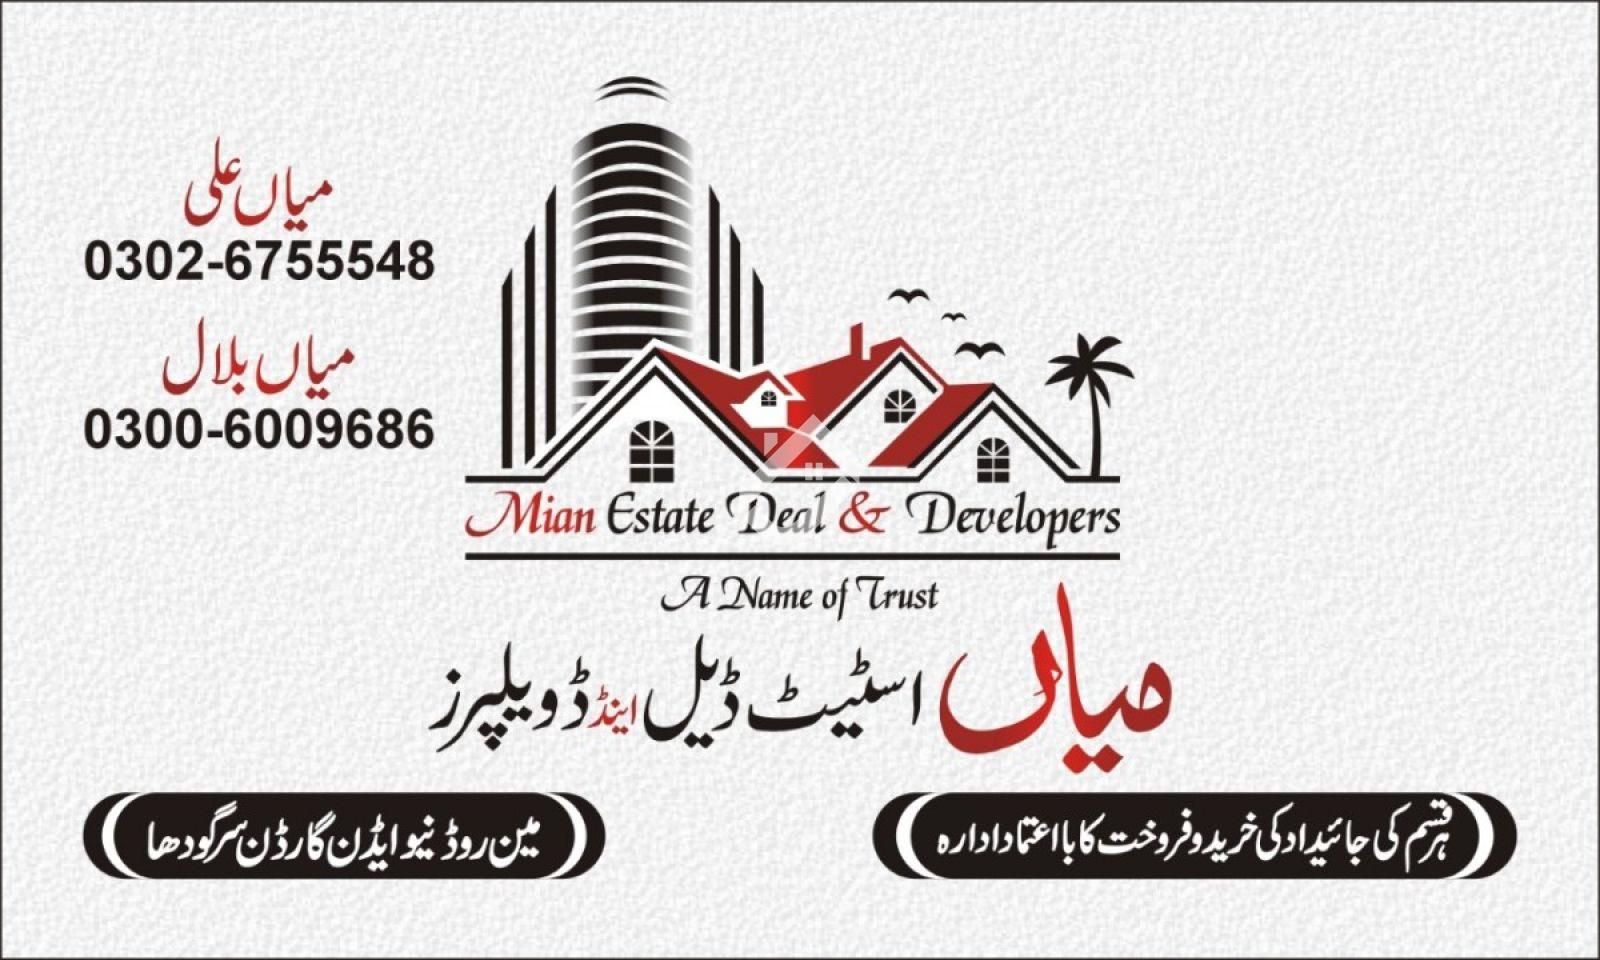 Office Images Realestate Agency Mian Estate Deal & Developers